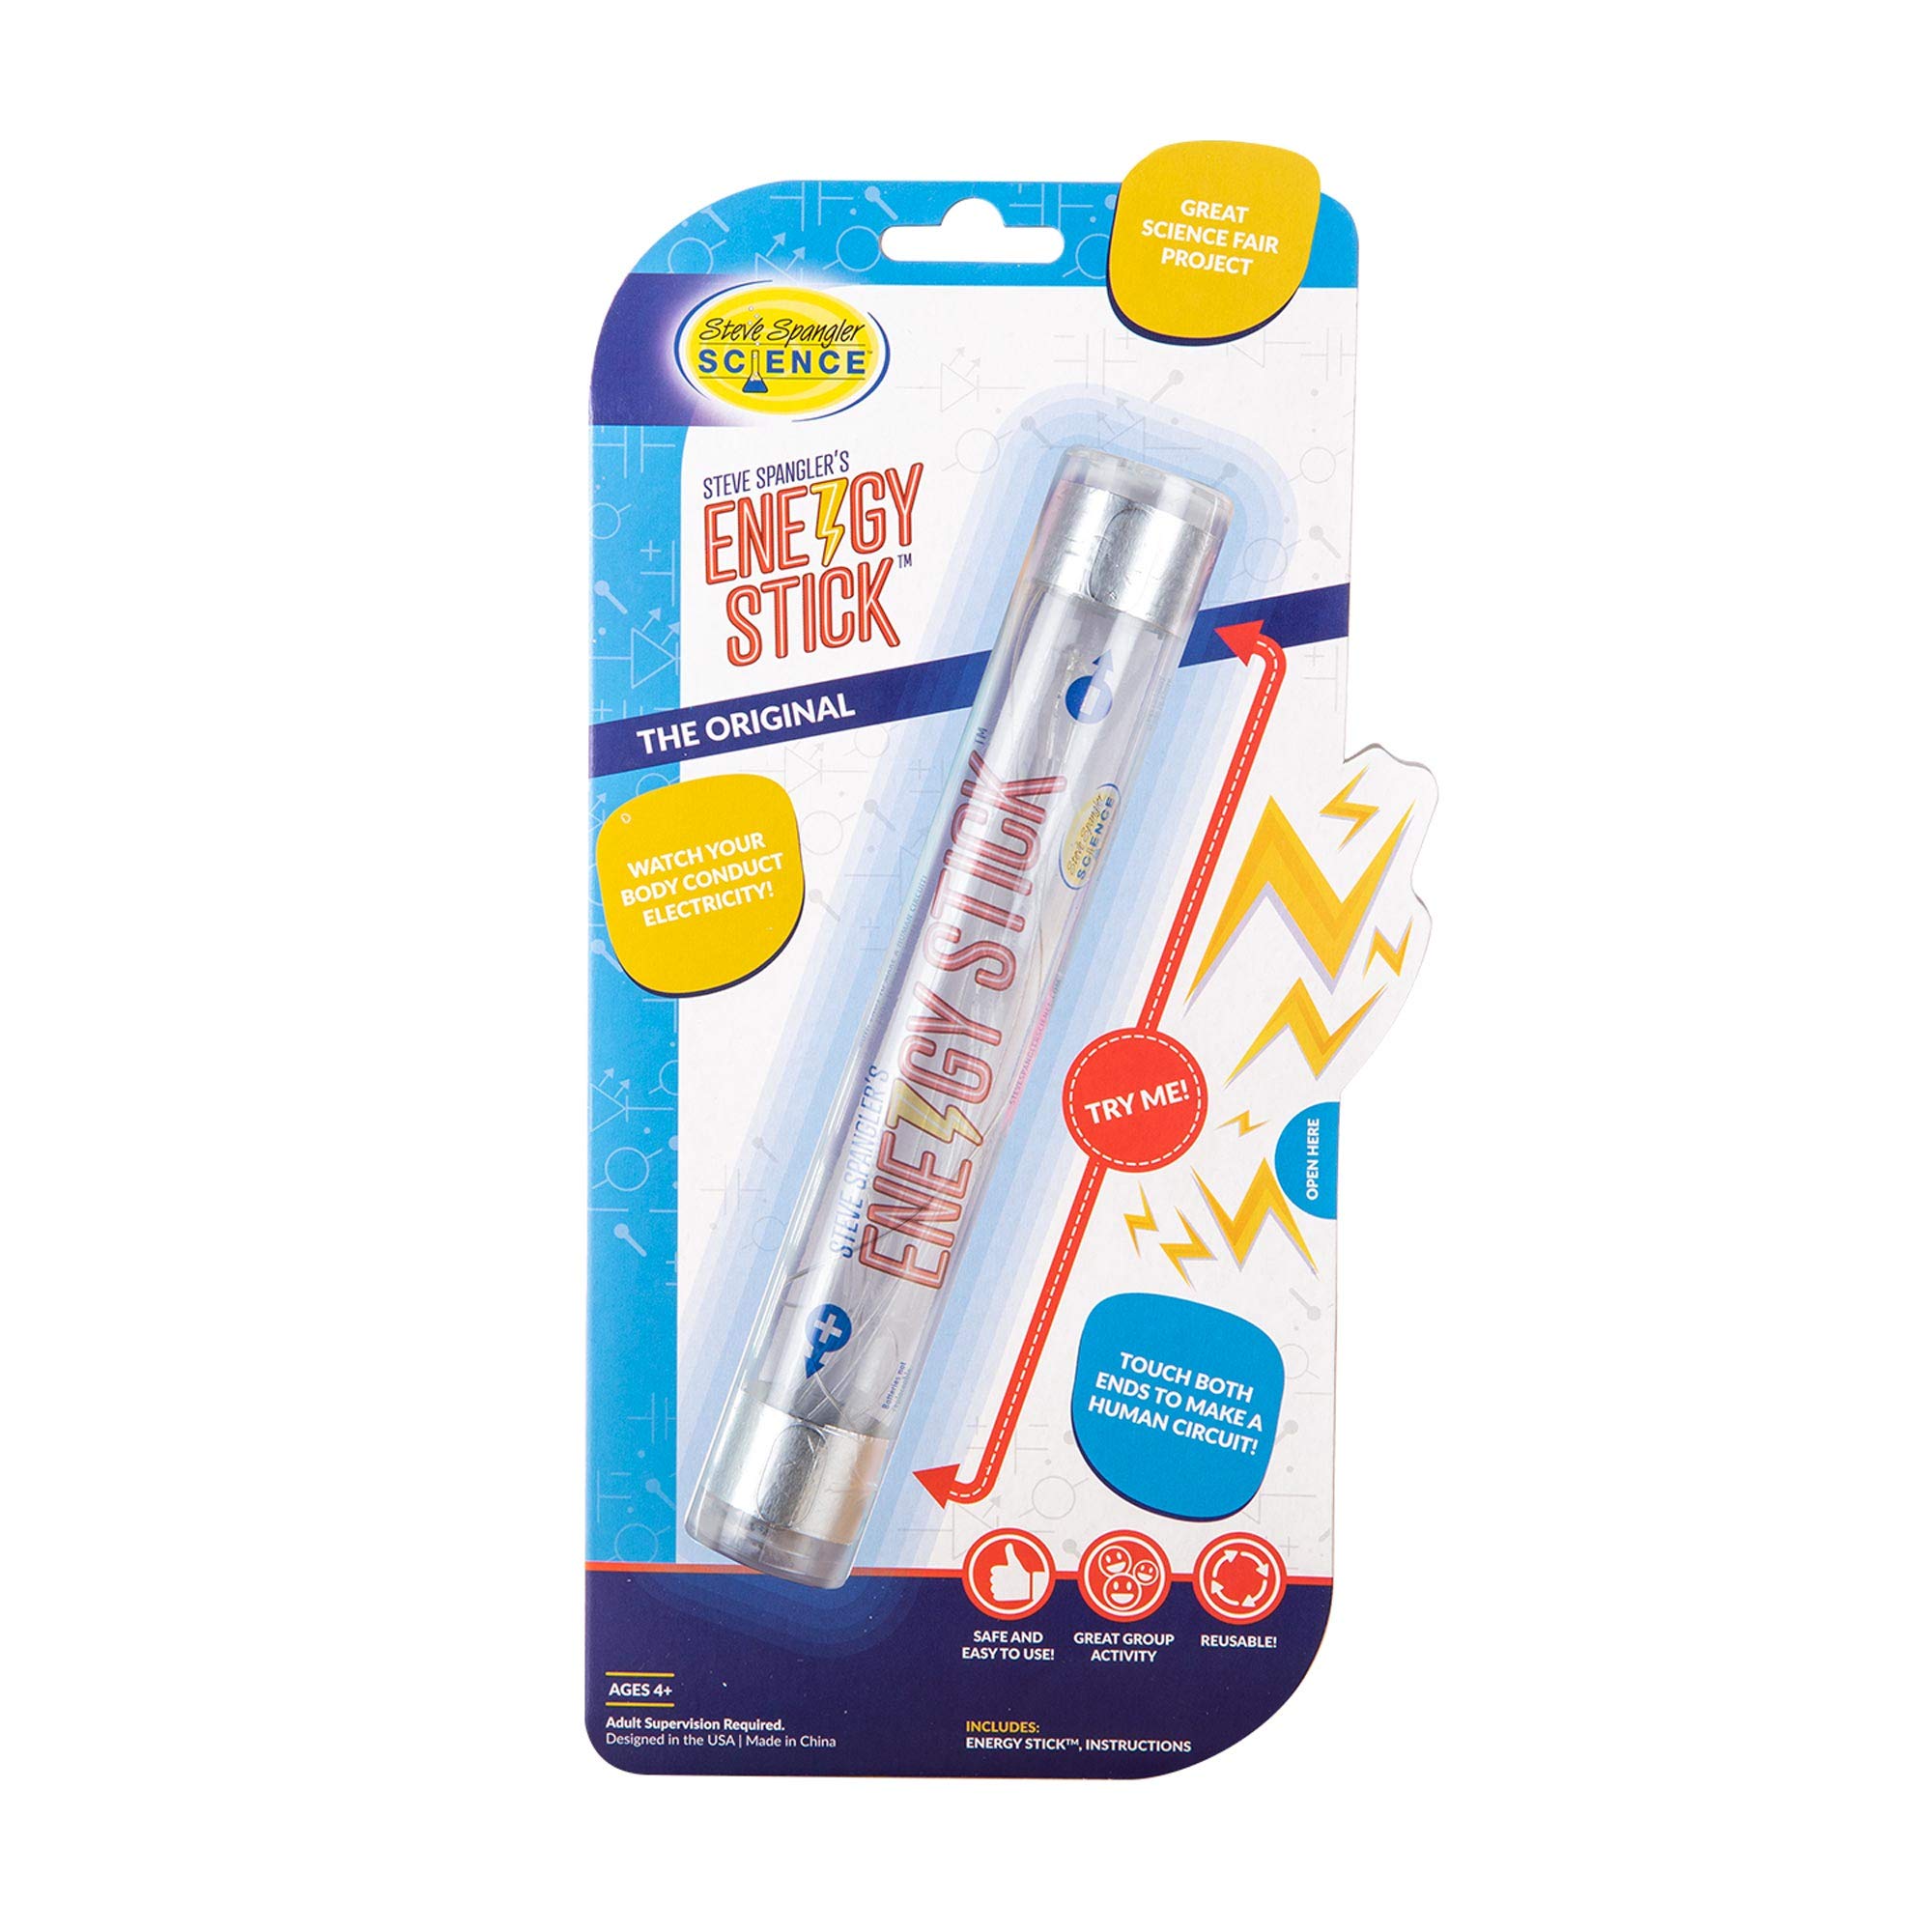 Steve Spangler Science Energy Stick – Fun Science Kits for Kids to Learn About Conductors of Electricity, Safe, Hands-On STEM Learning Toy, Independent or Group Activity for Classrooms or Home